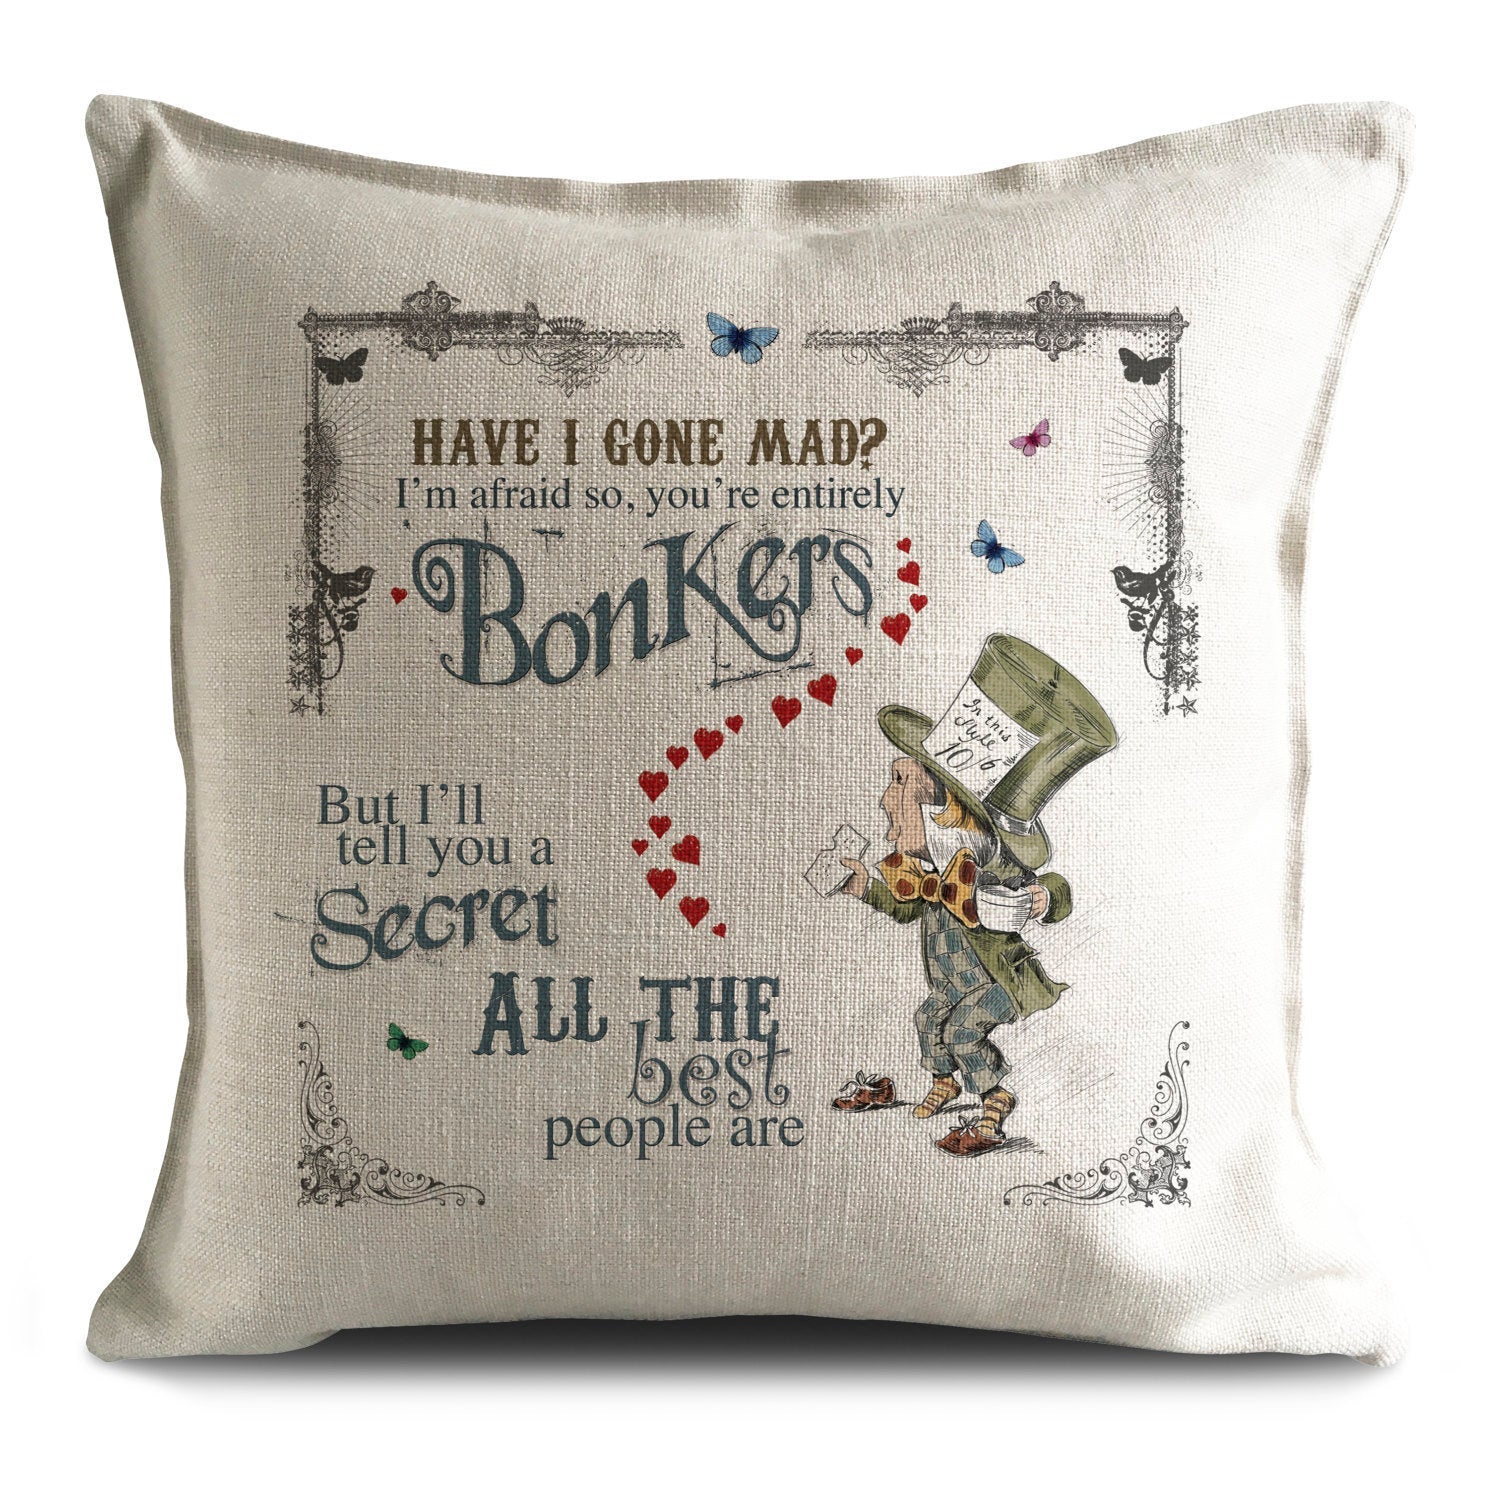 Alice in wonderland mad hatter cushion cover with bonkers quote